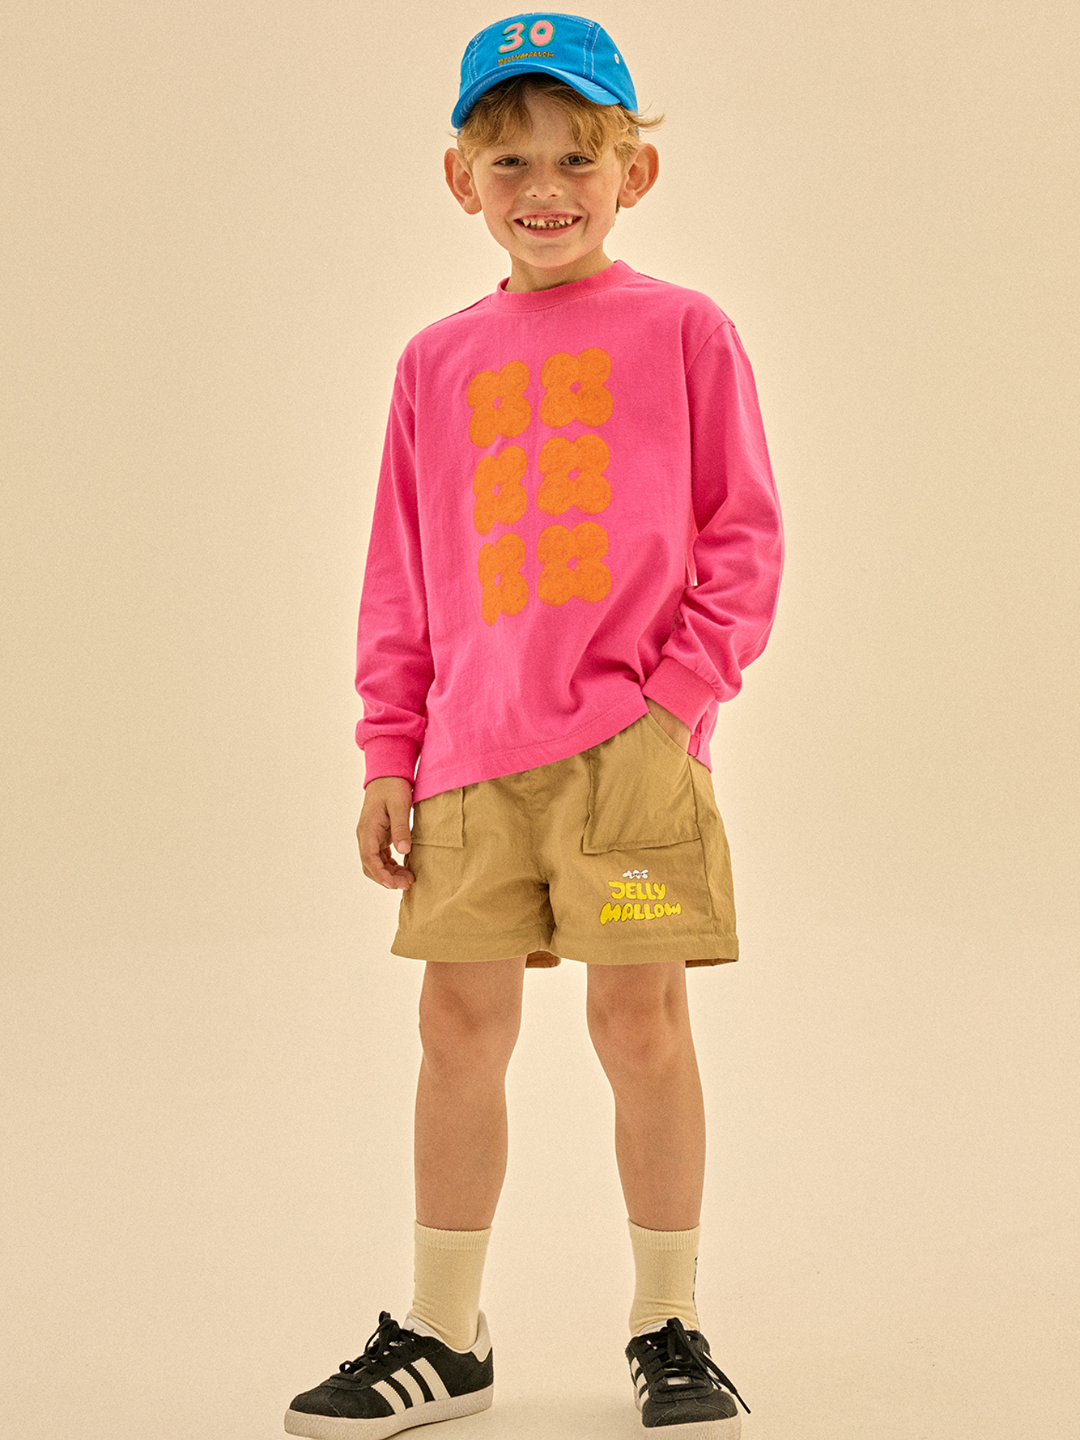 Child wearing Clover Long Sleeve T-shirt with a blue baseball hat, tan shorts, cream socks, and black shoes.